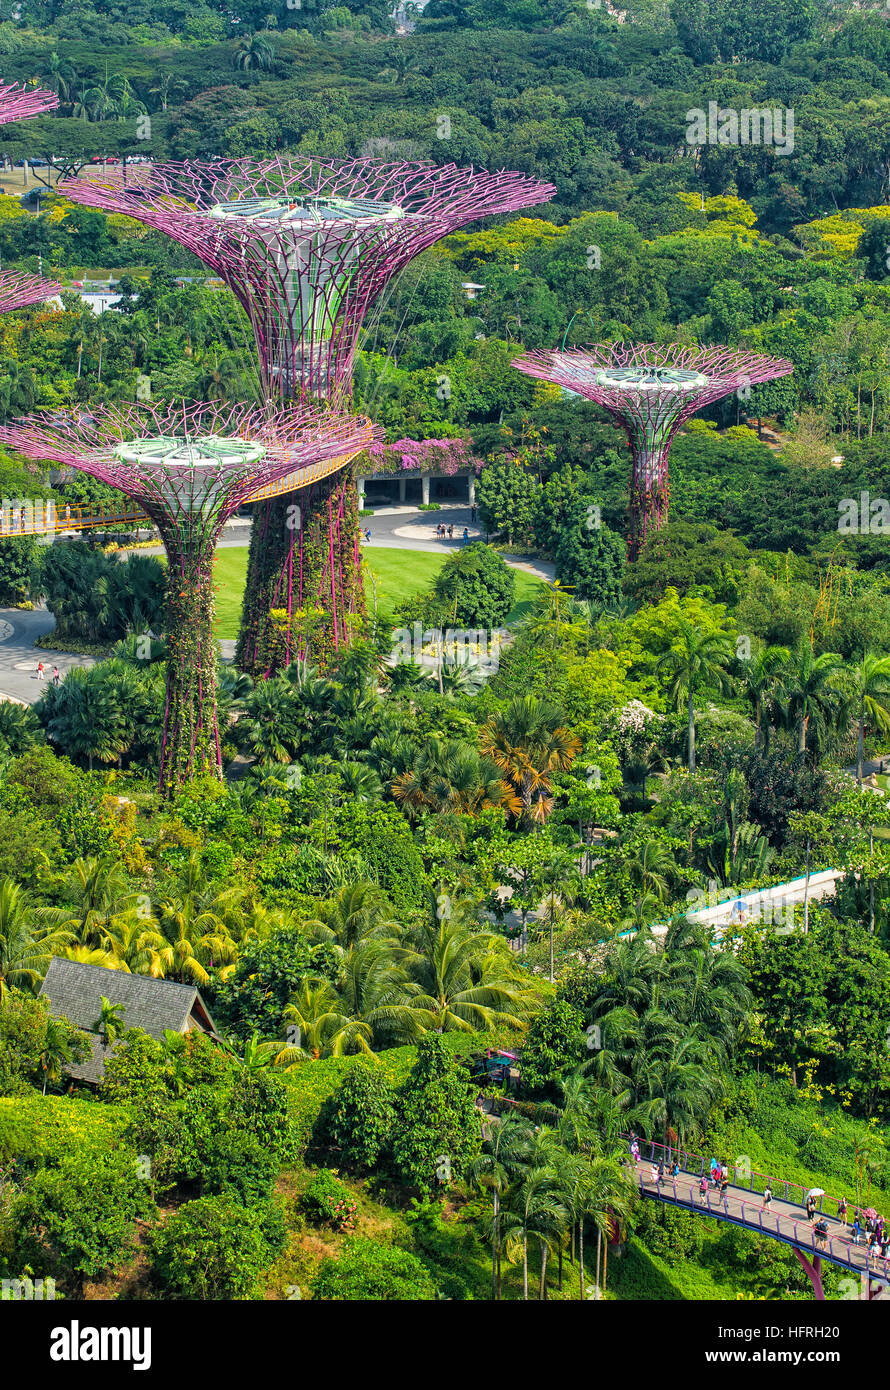 Gardens by the bay, Singapour Banque D'Images